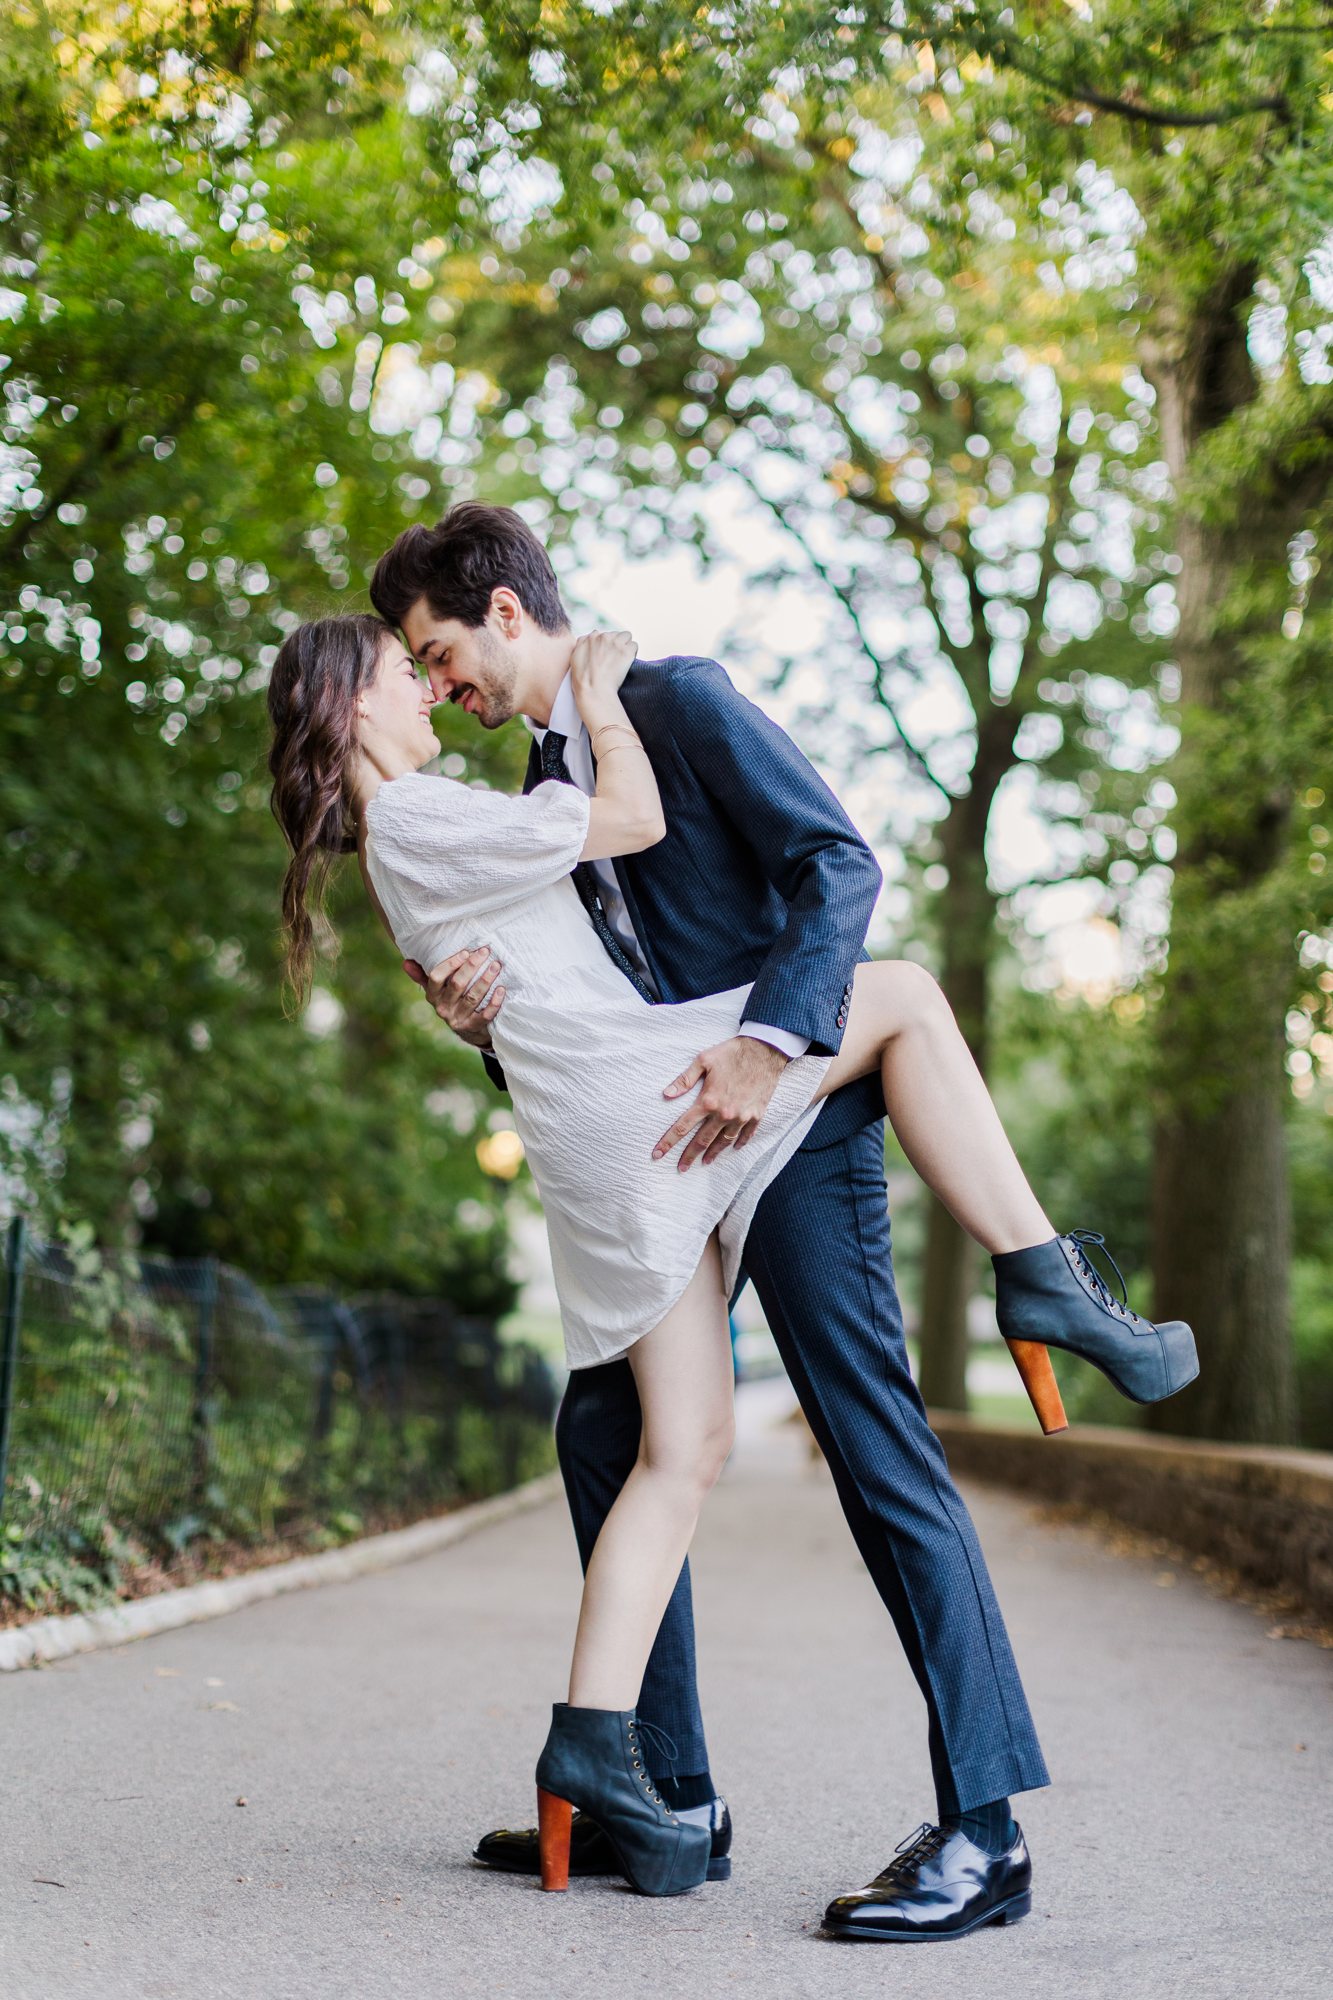 Iconic Central Park Engagement Photos in NYC